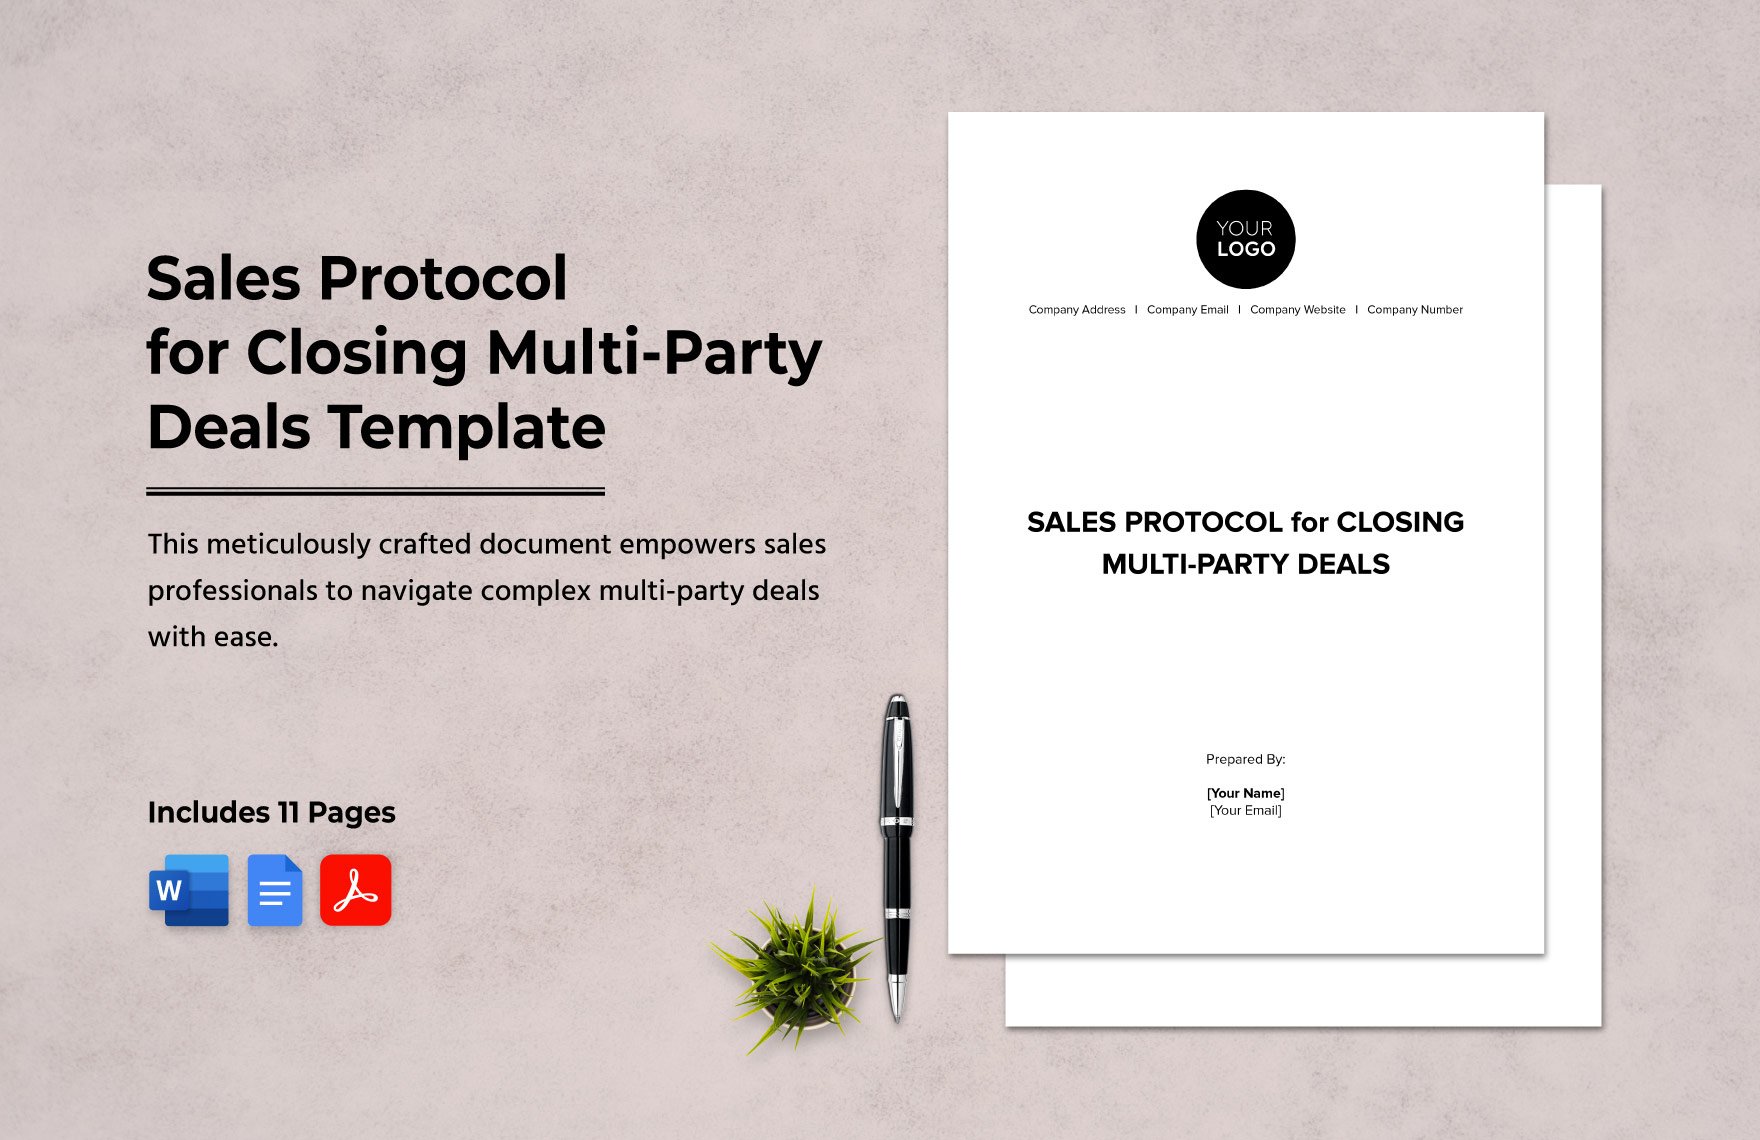 Sales Protocol for Closing Multi-Party Deals Template